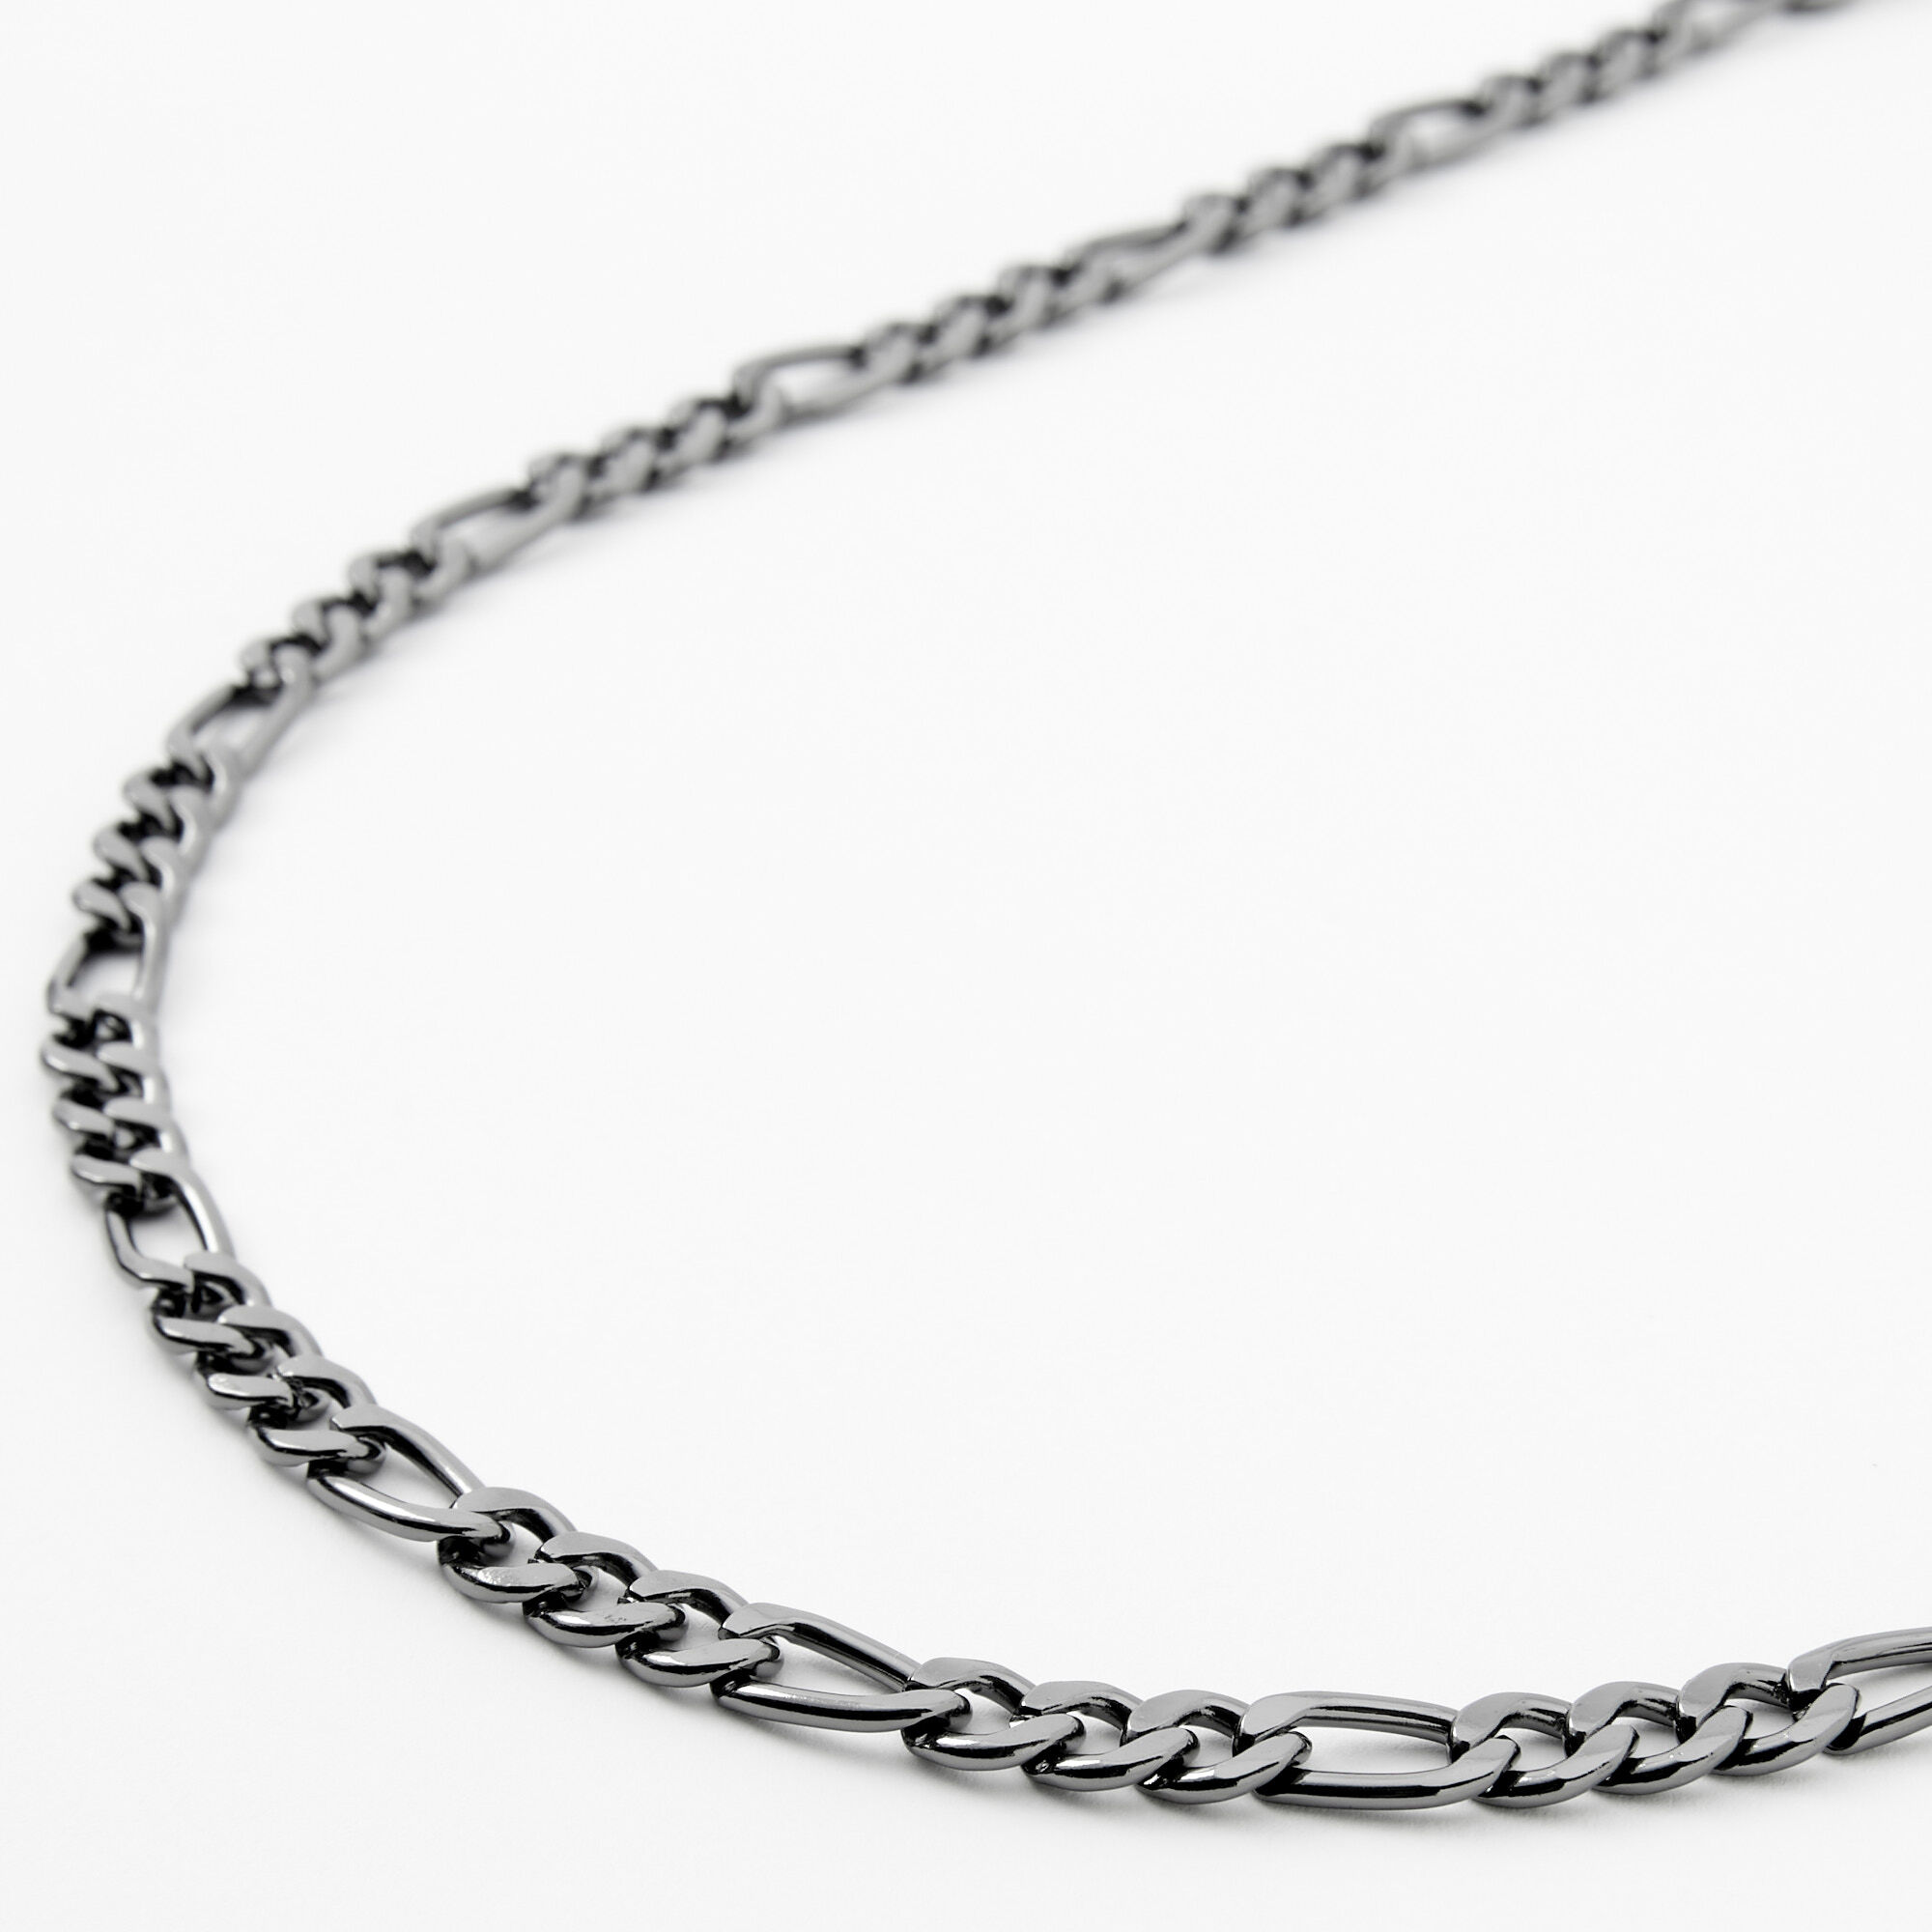 View Claires Hematite Figaro 20 Chain Link Necklace information